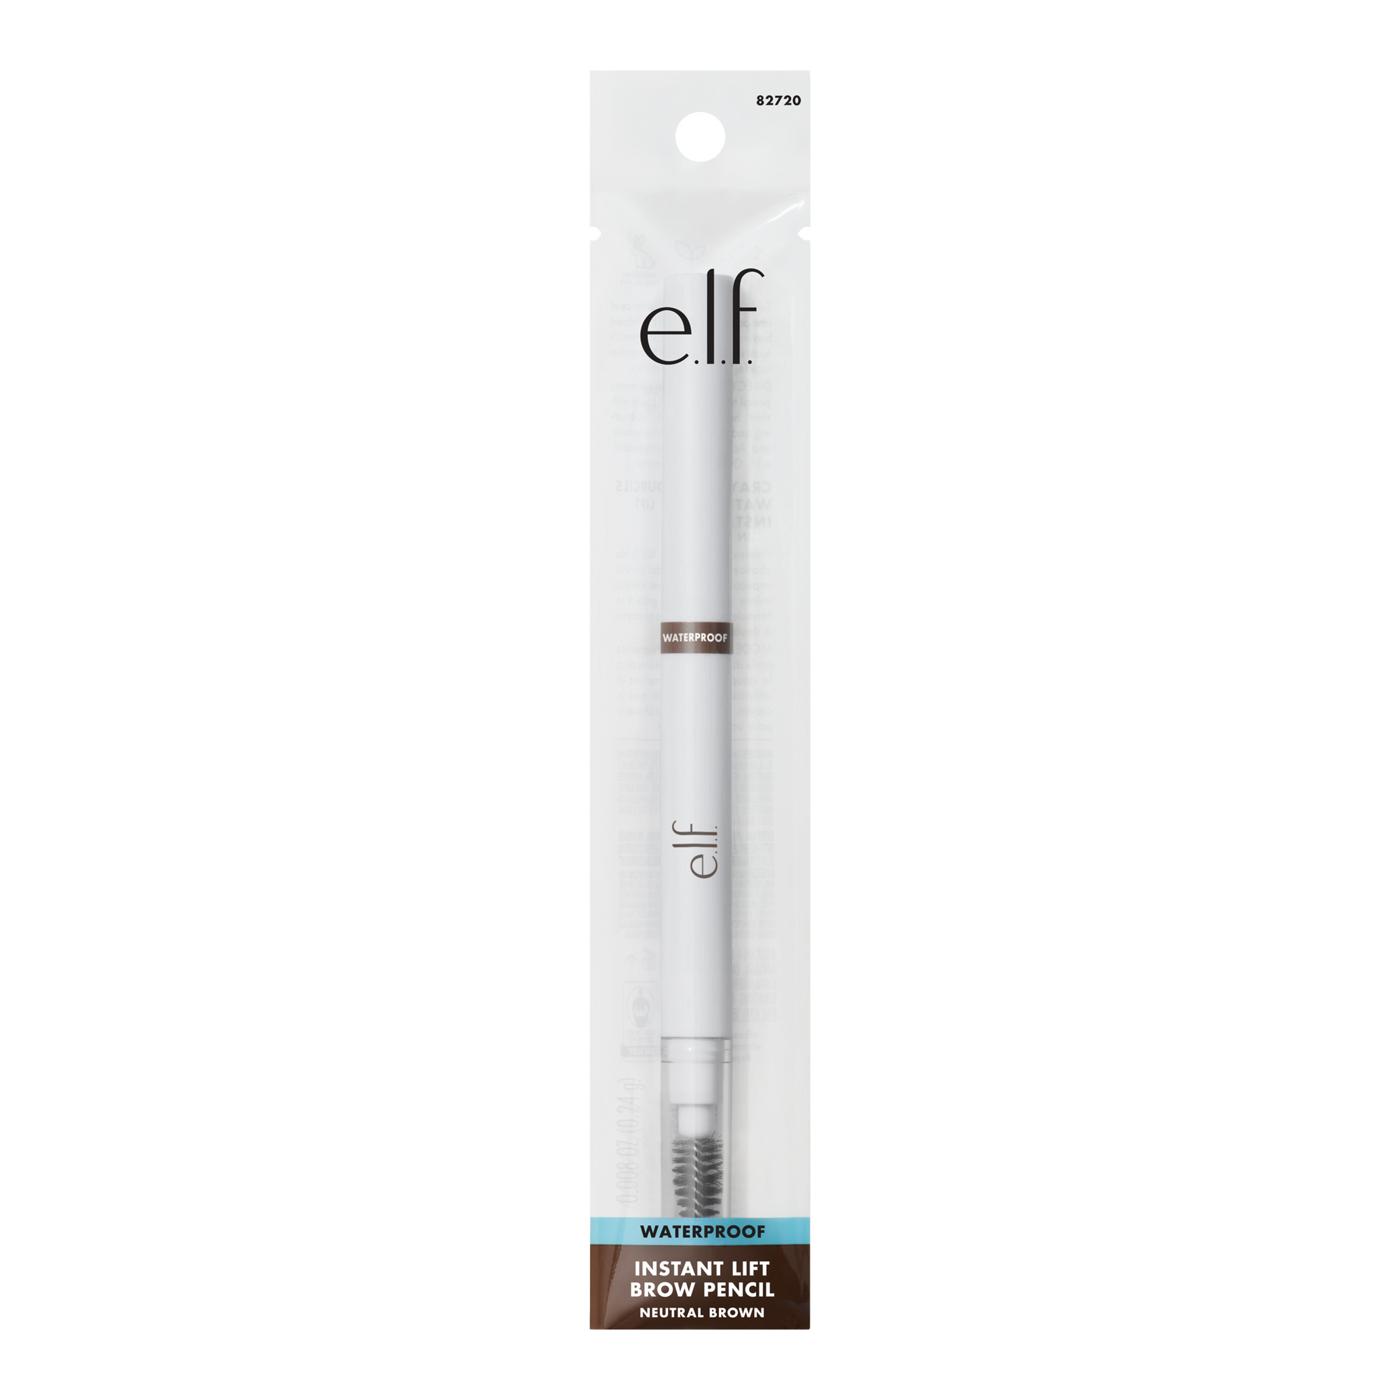 e.l.f. Instant Lift Brow Pencil Waterproof - Natural Brown; image 1 of 2